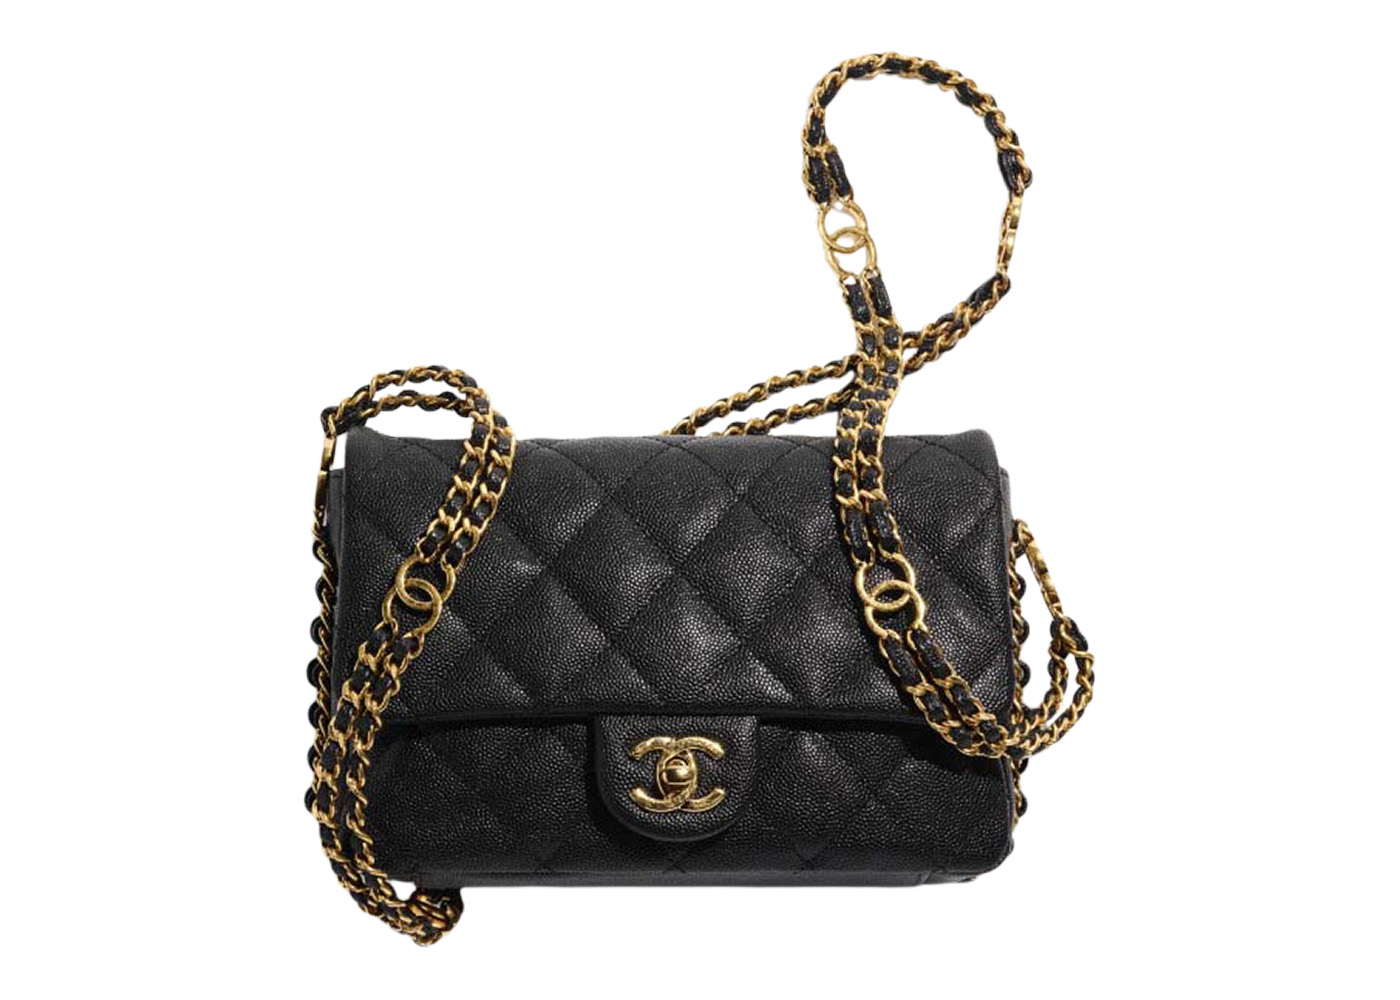 Your Guide To Finally Purchasing That Iconic Chanel Handbag—With Prices! |  Metro.Style